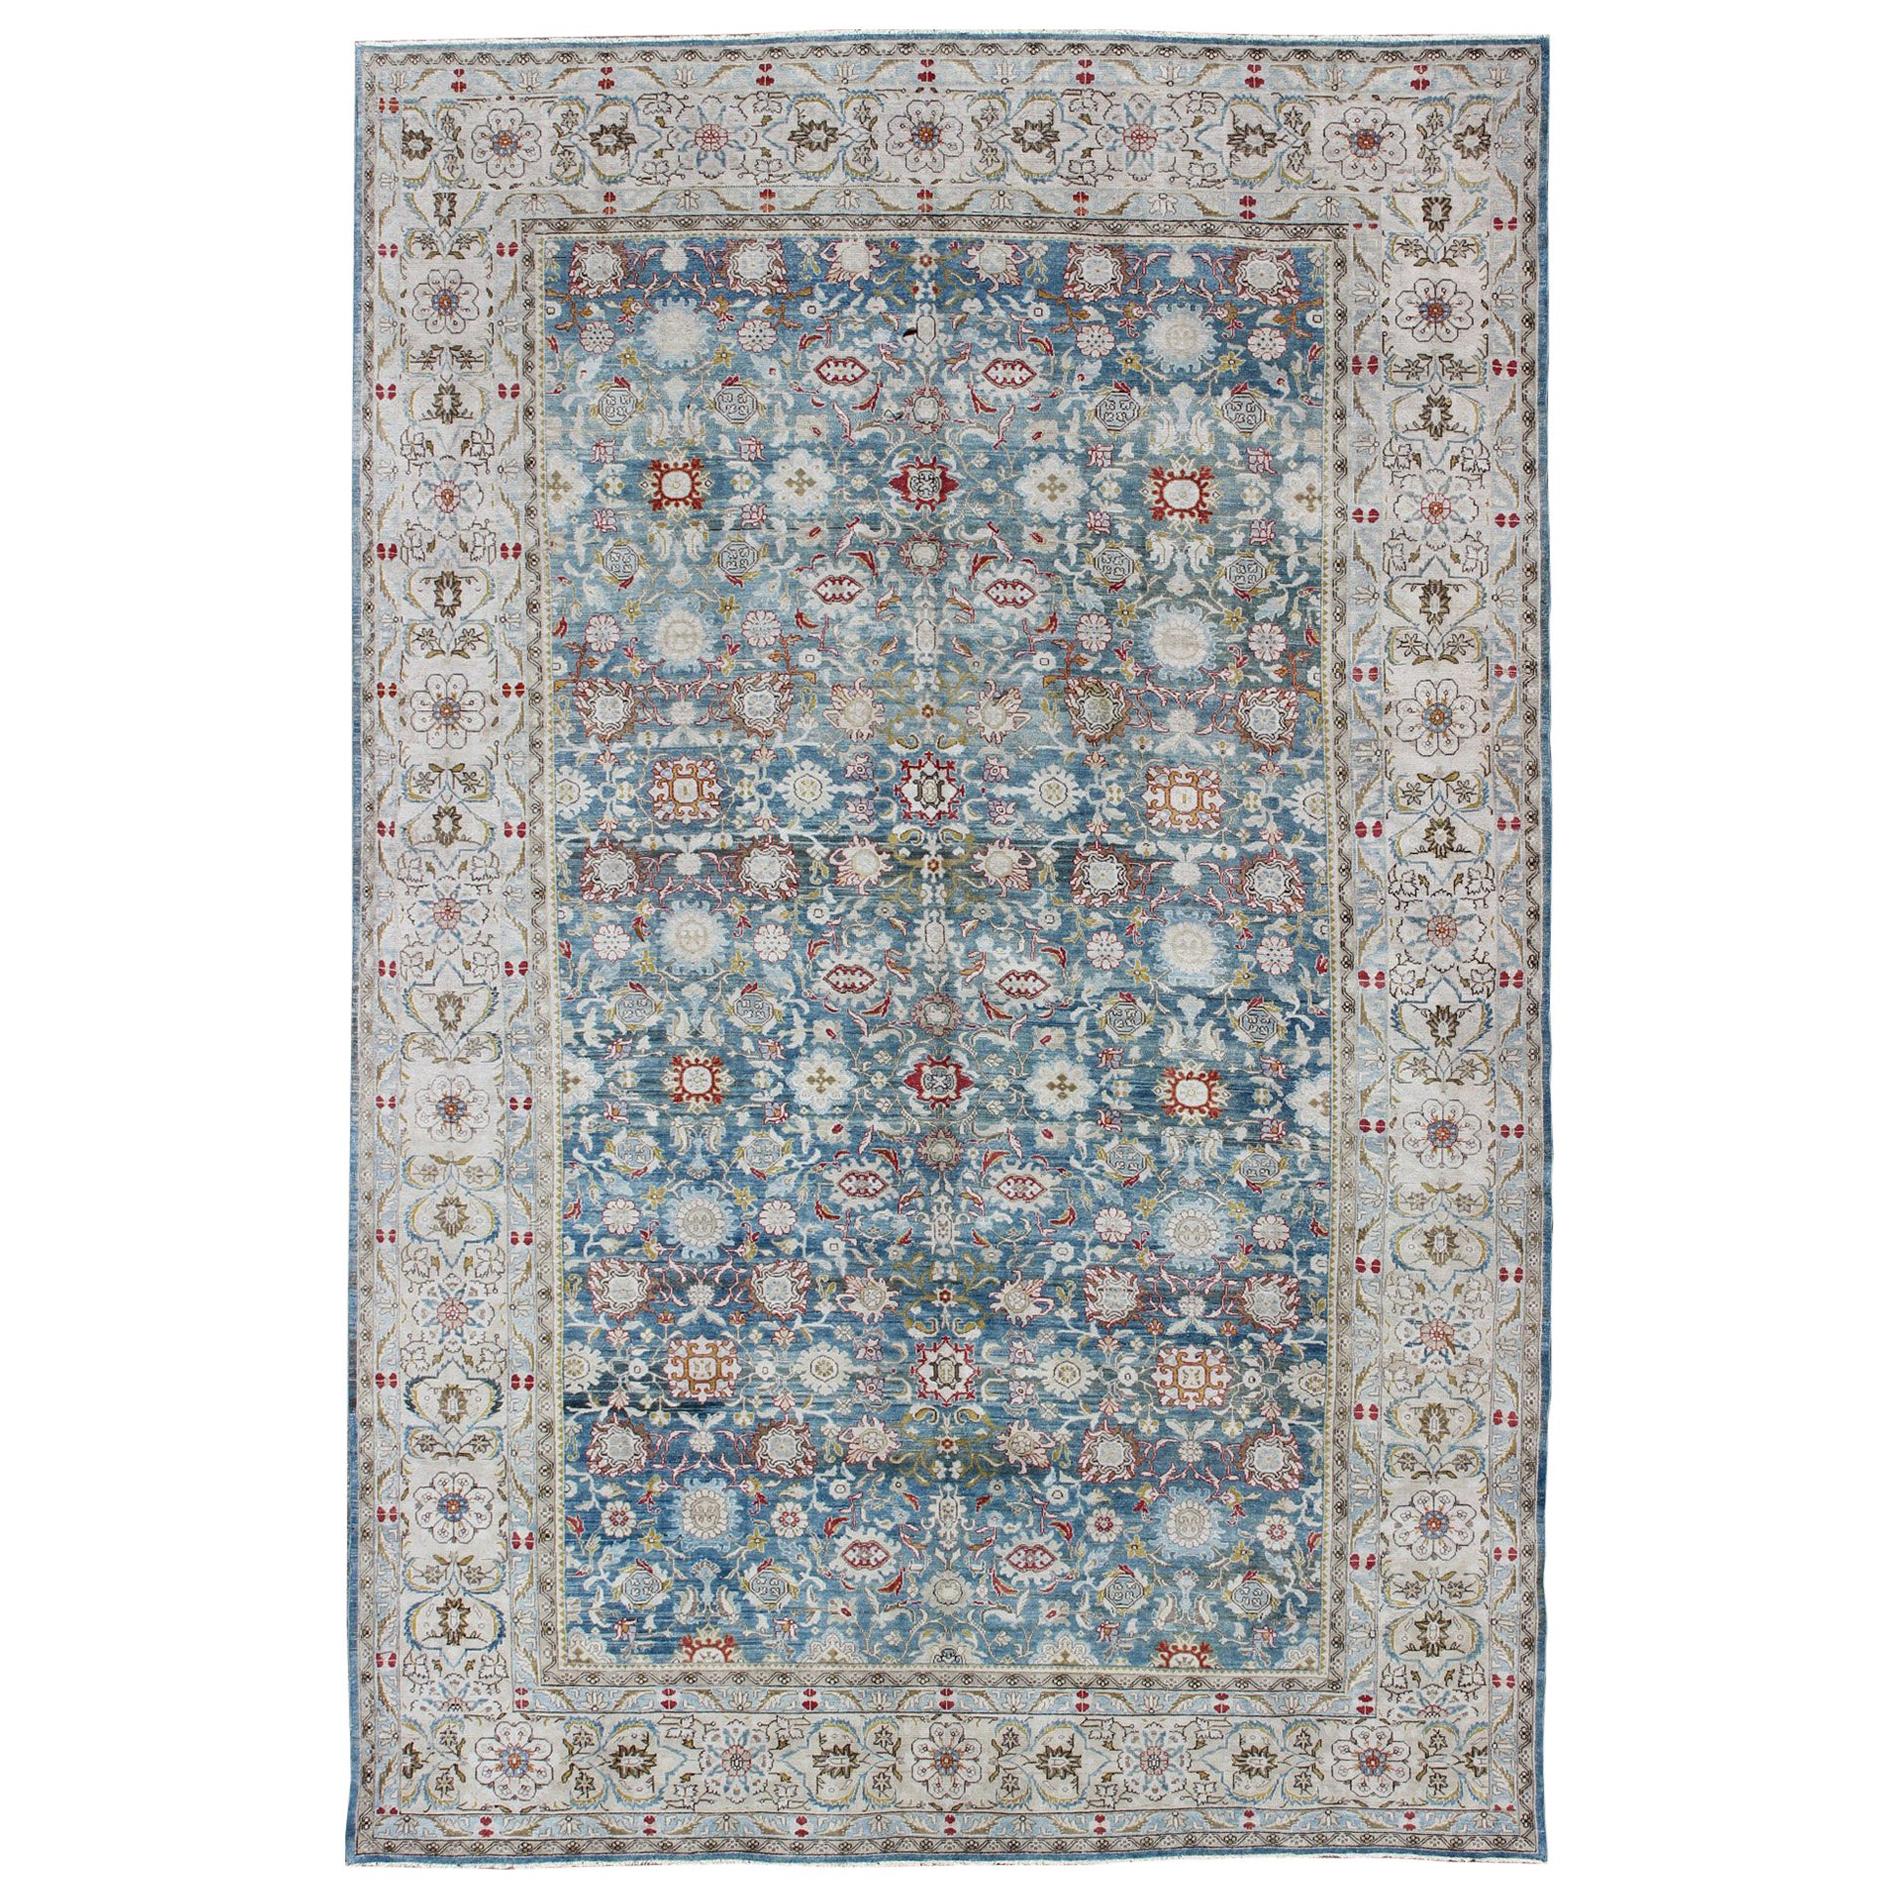 Colorful Large Antique Blue Gray Background Fine Persian Malayer Rug